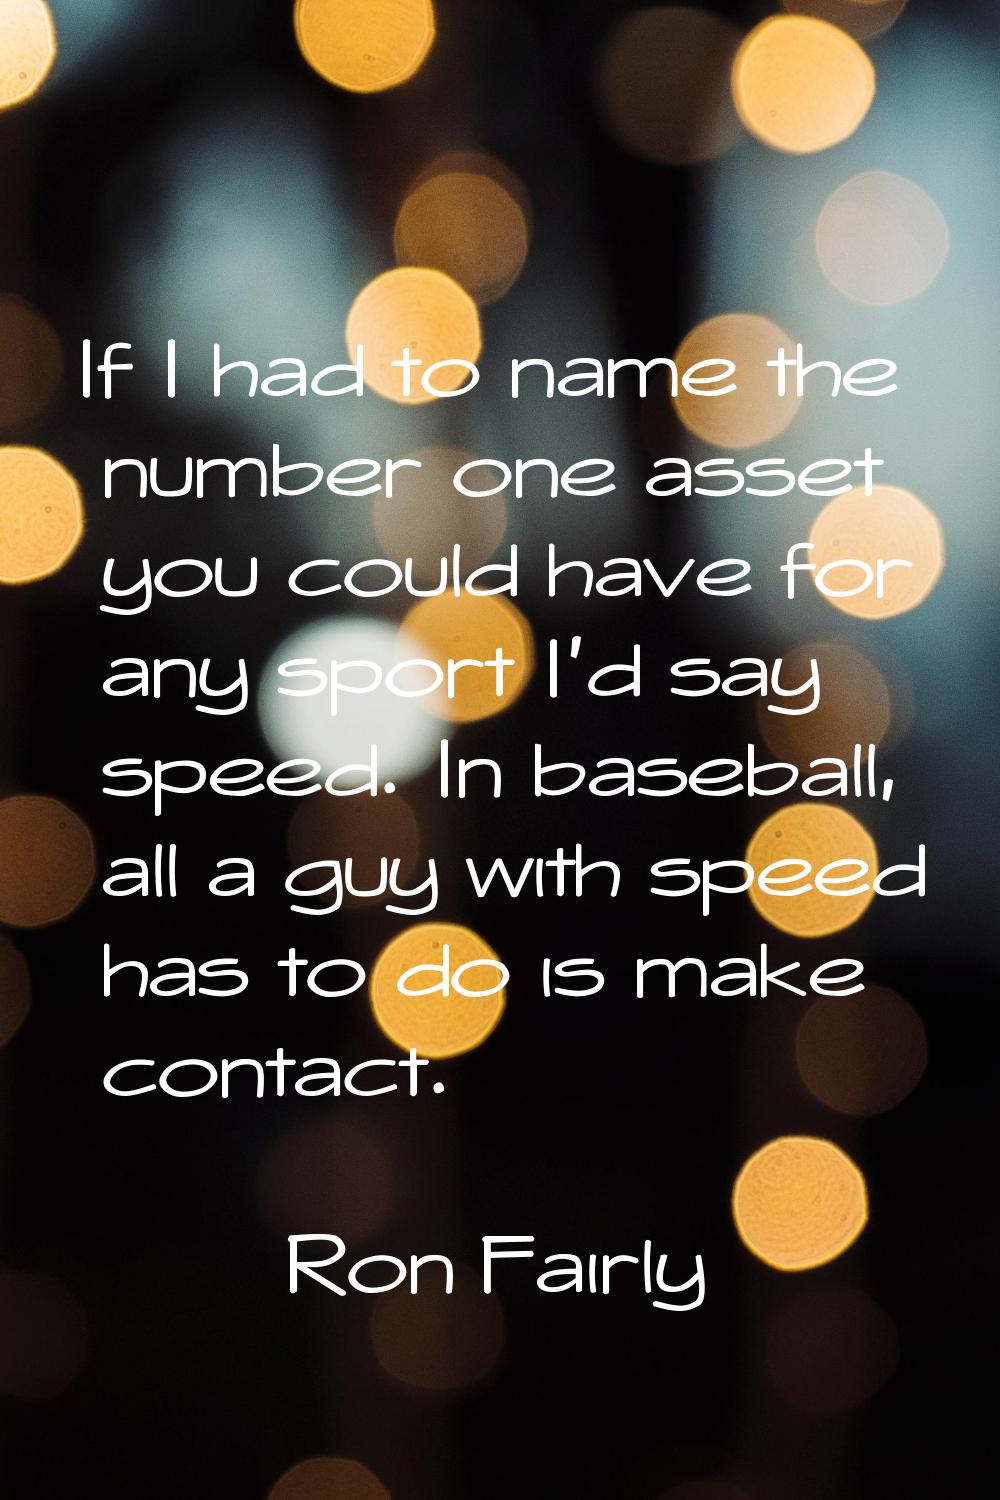 If I had to name the number one asset you could have for any sport I'd say speed. In baseball, all 